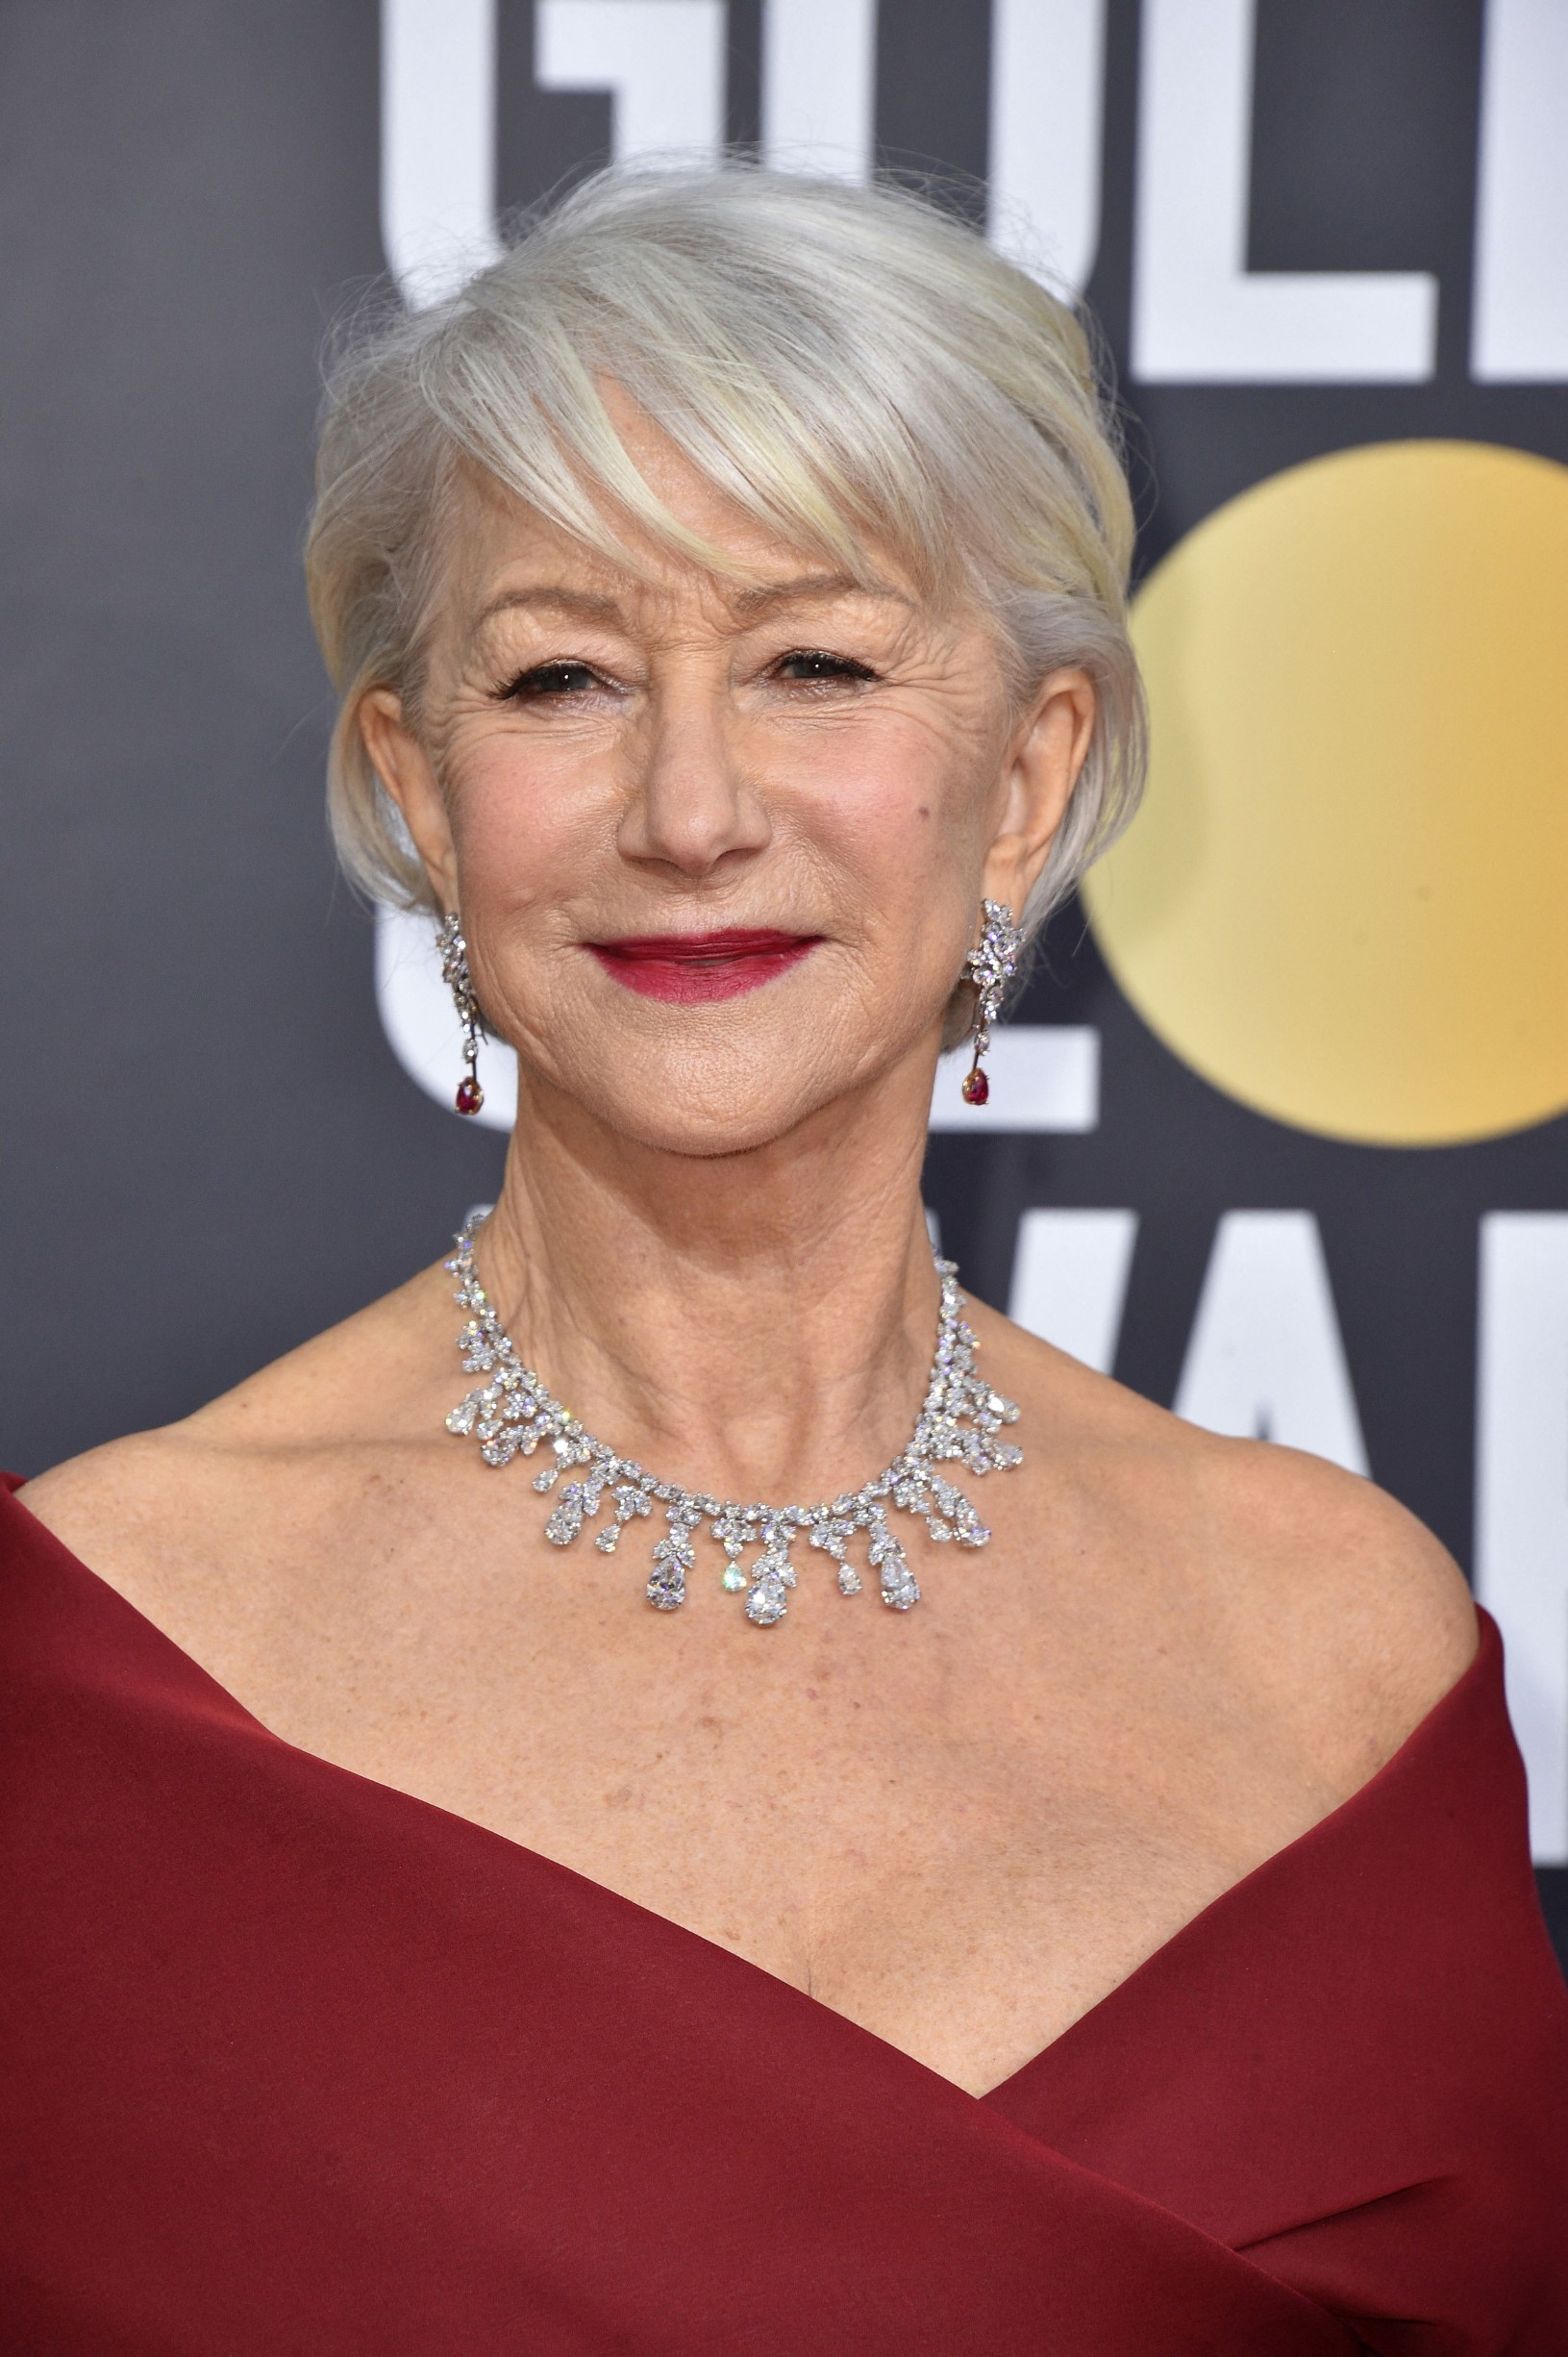 Helen Mirren attending the 77th Golden Globe Awards Arrivals at The Beverly Hilton, Los Angeles, CA, USA on January 5, 2020., Image: 491220443, License: Rights-managed, Restrictions: , Model Release: no, Credit line: Hahn Lionel/ABACA / Abaca Press / Profimedia